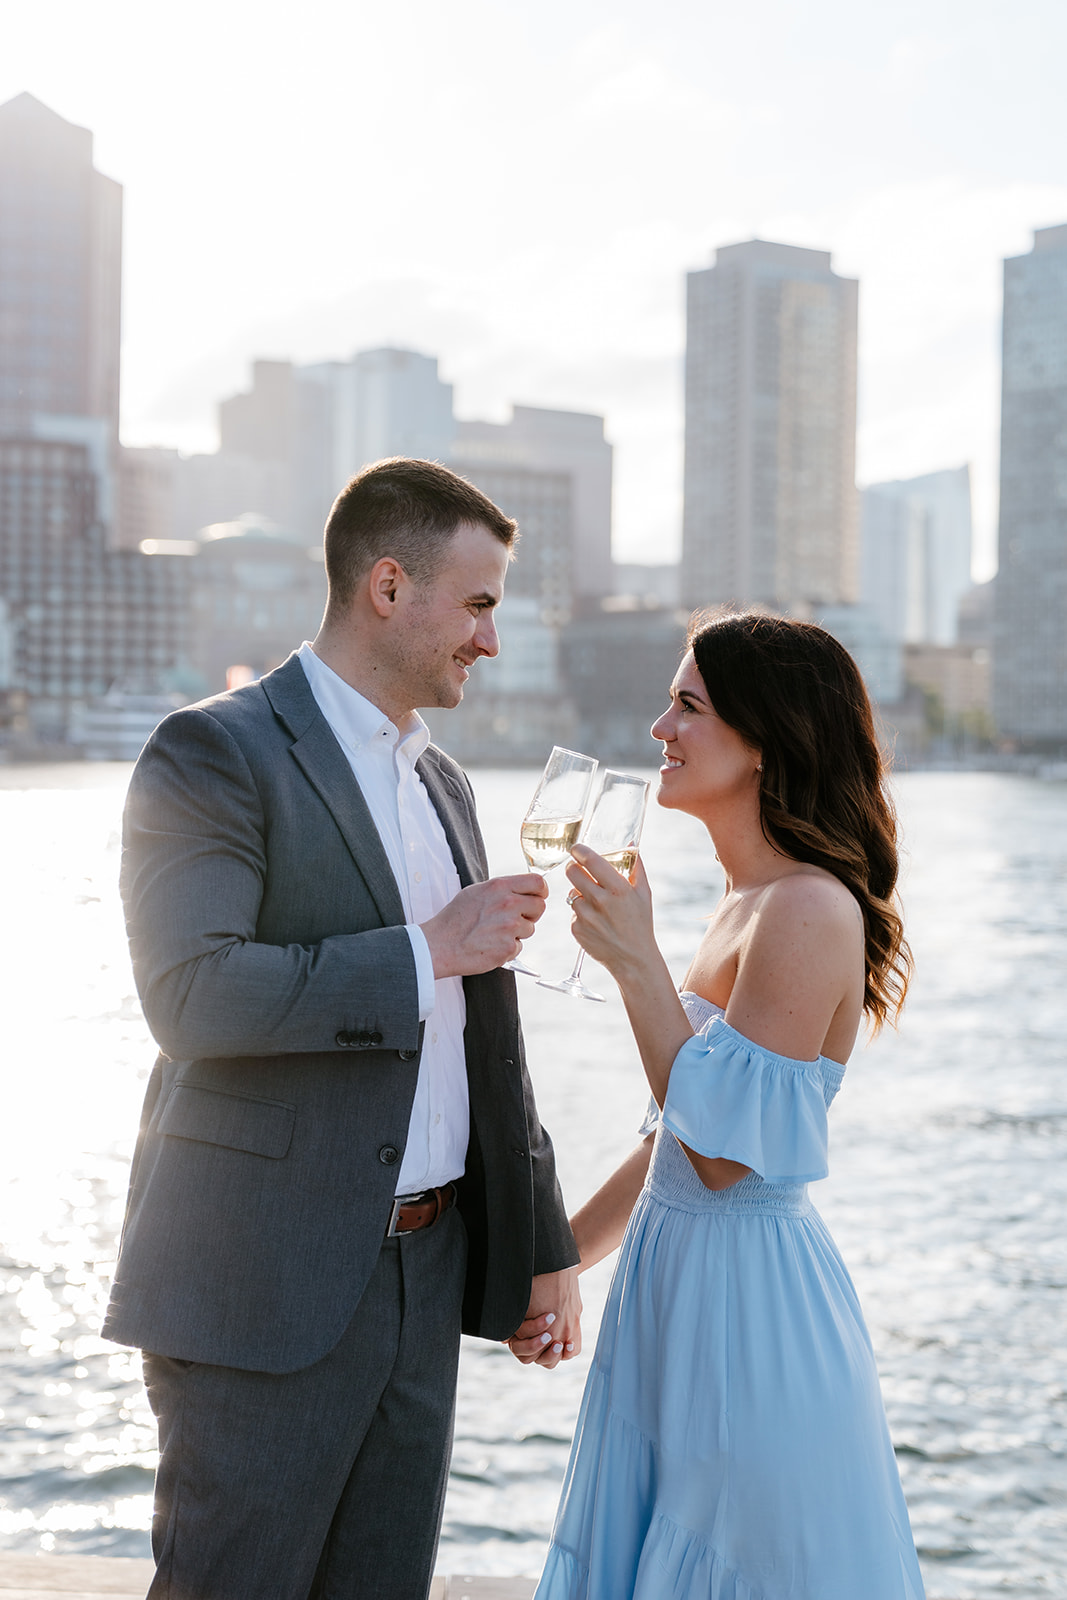 A couple toasting with glasses of wine, looking at each other affectionately as they take Boston engagement photos